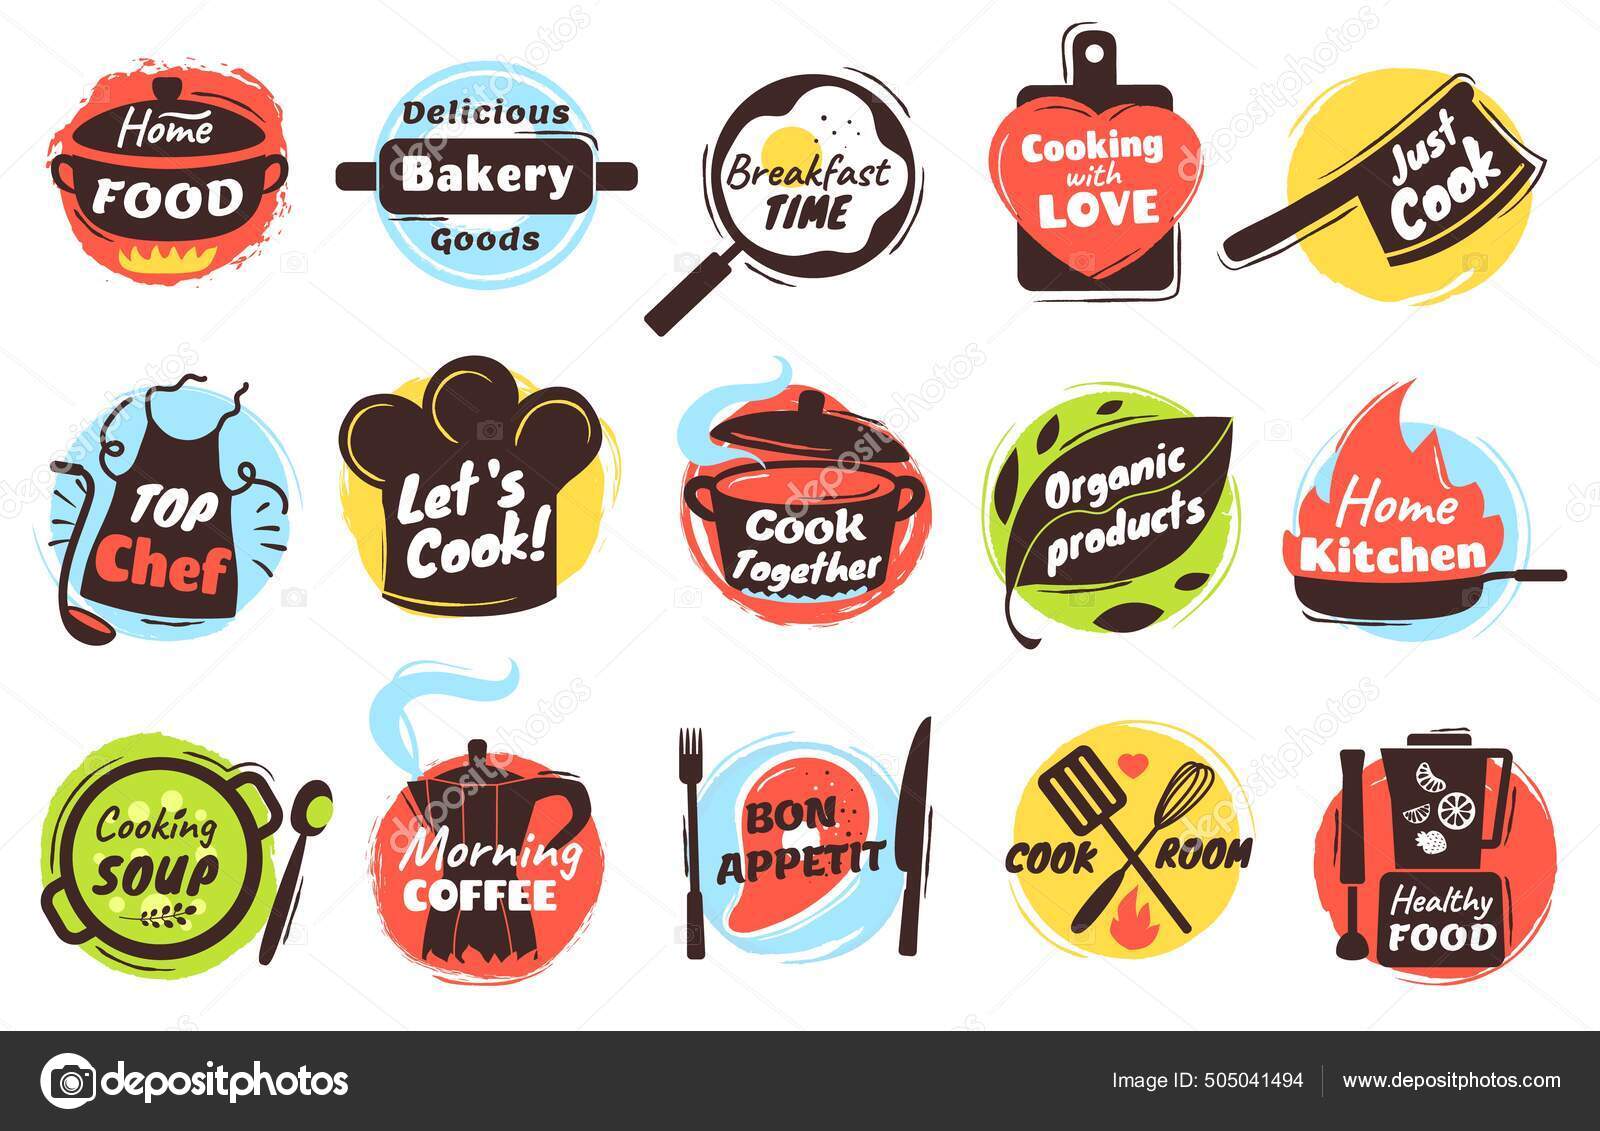 Popcorn tool icon simple seller cooking Royalty Free Vector